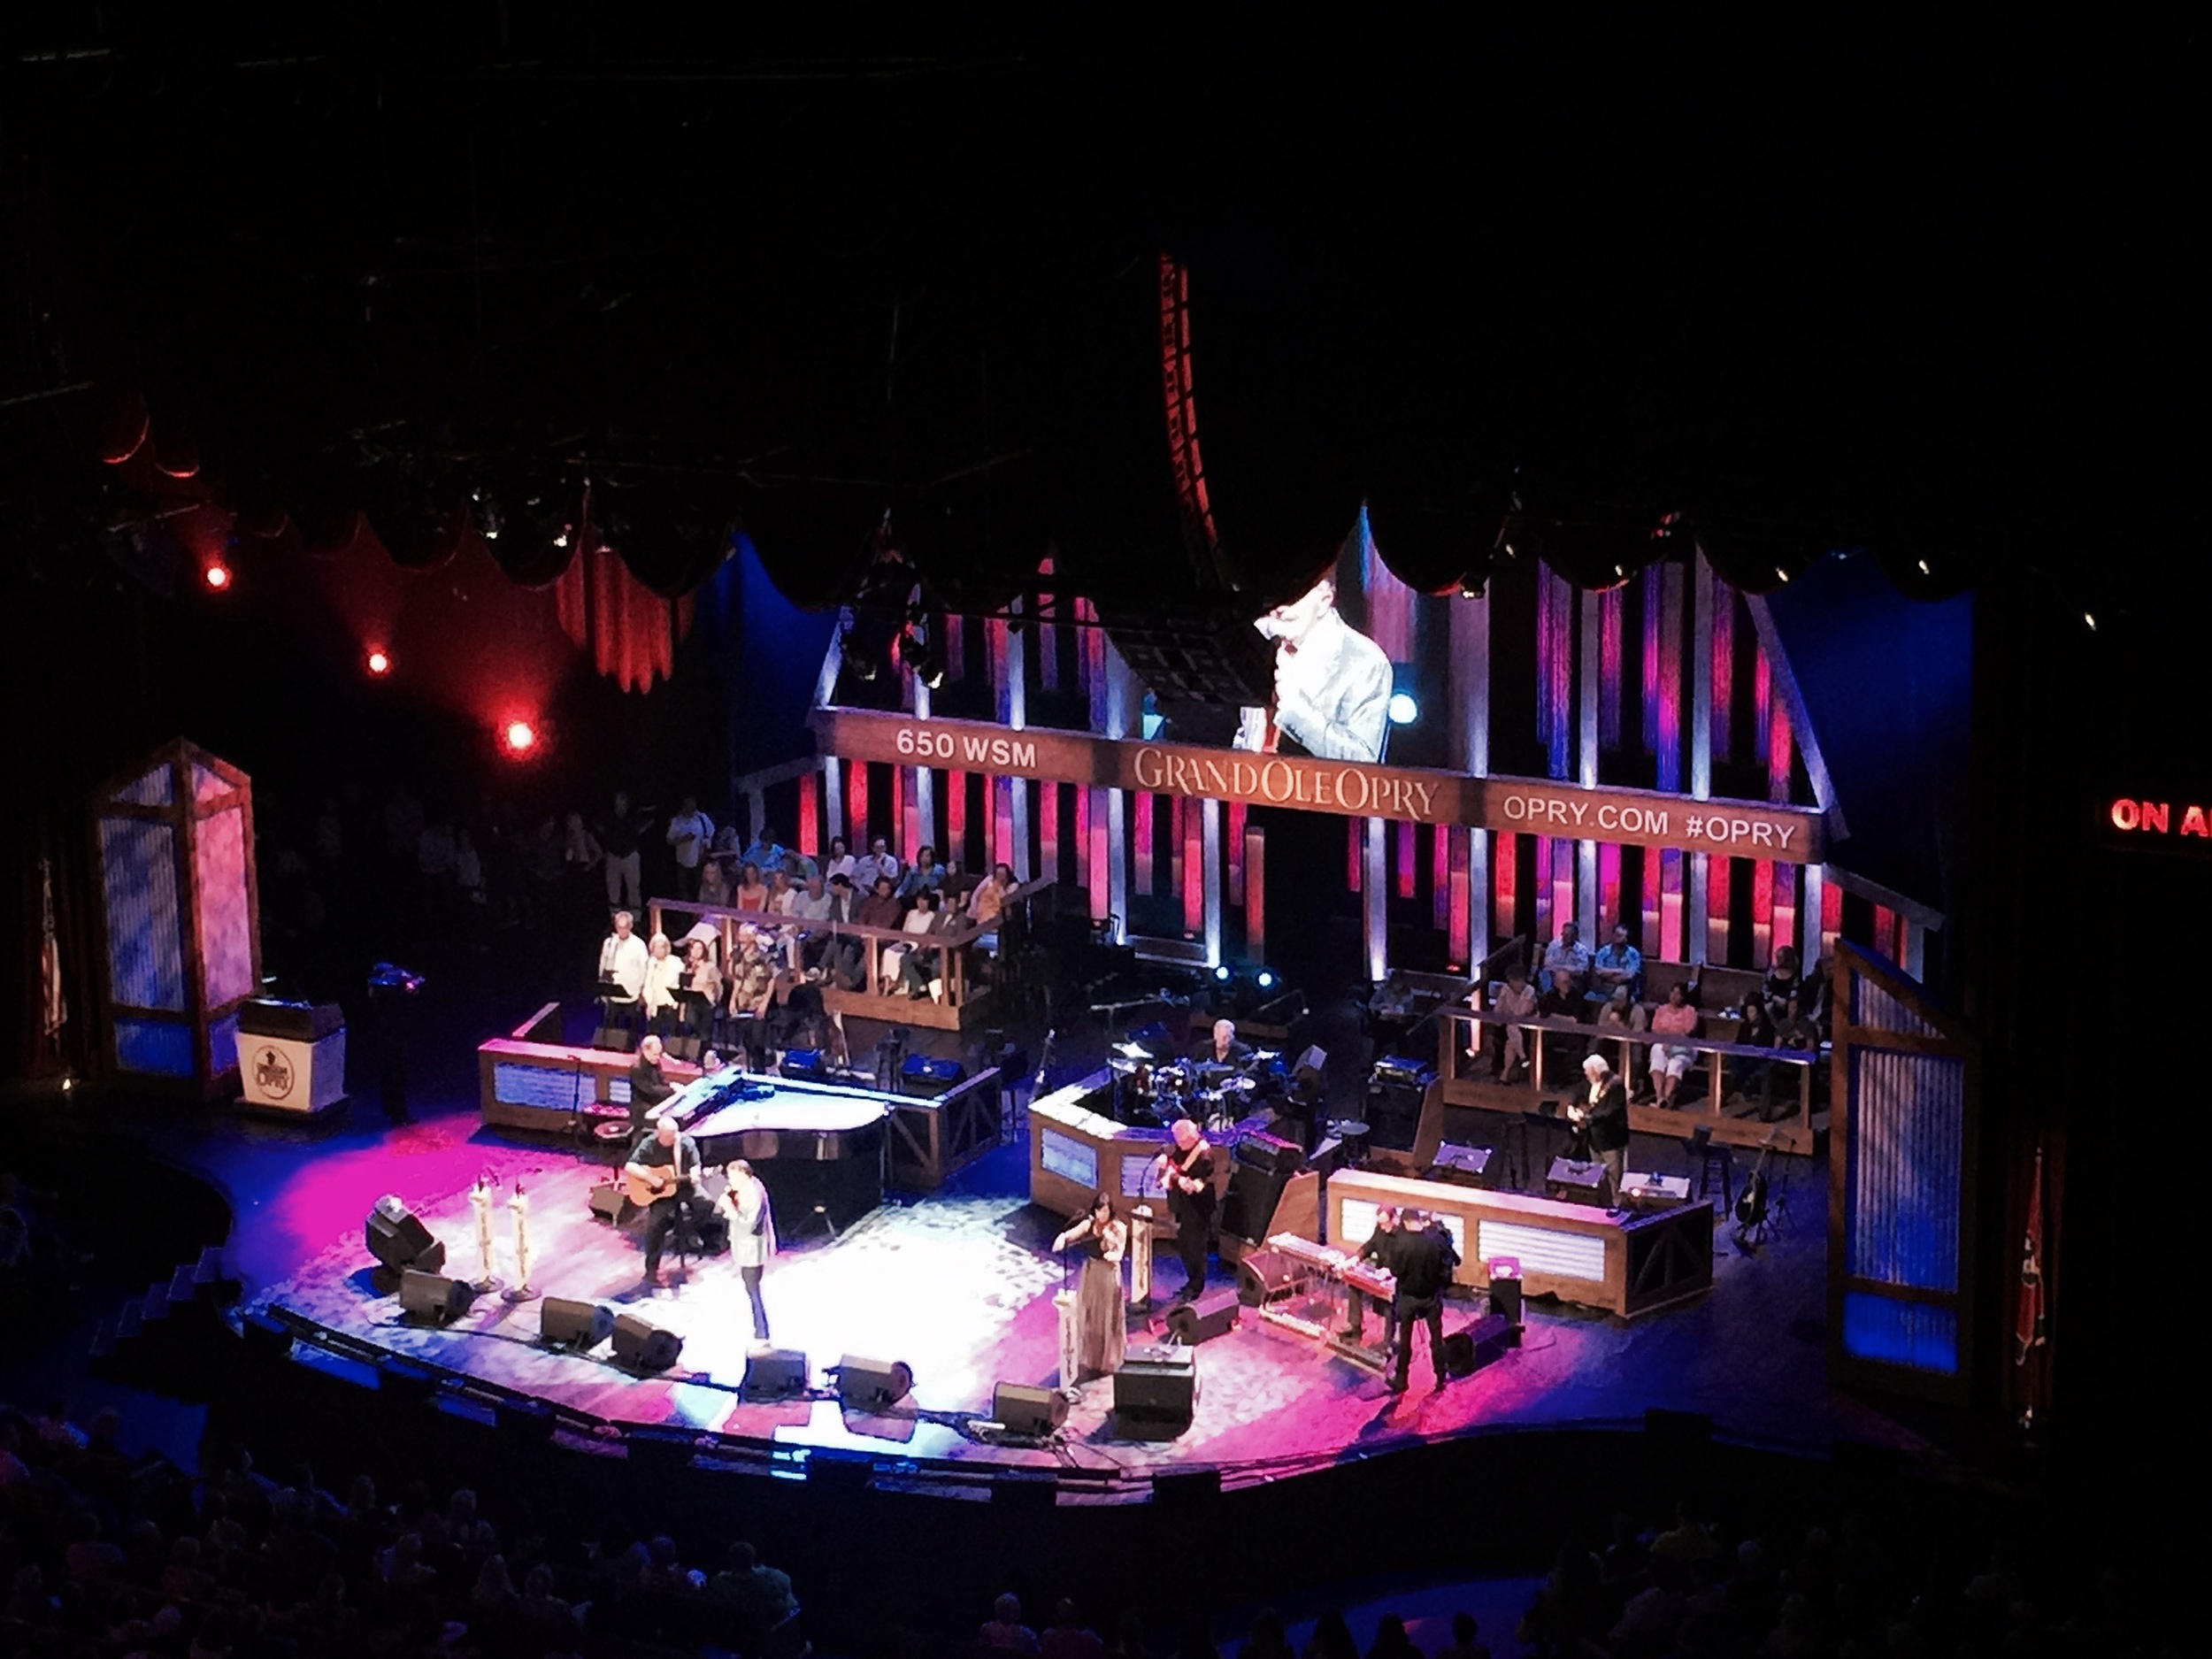 Grand Ol' Opry night with the Folks